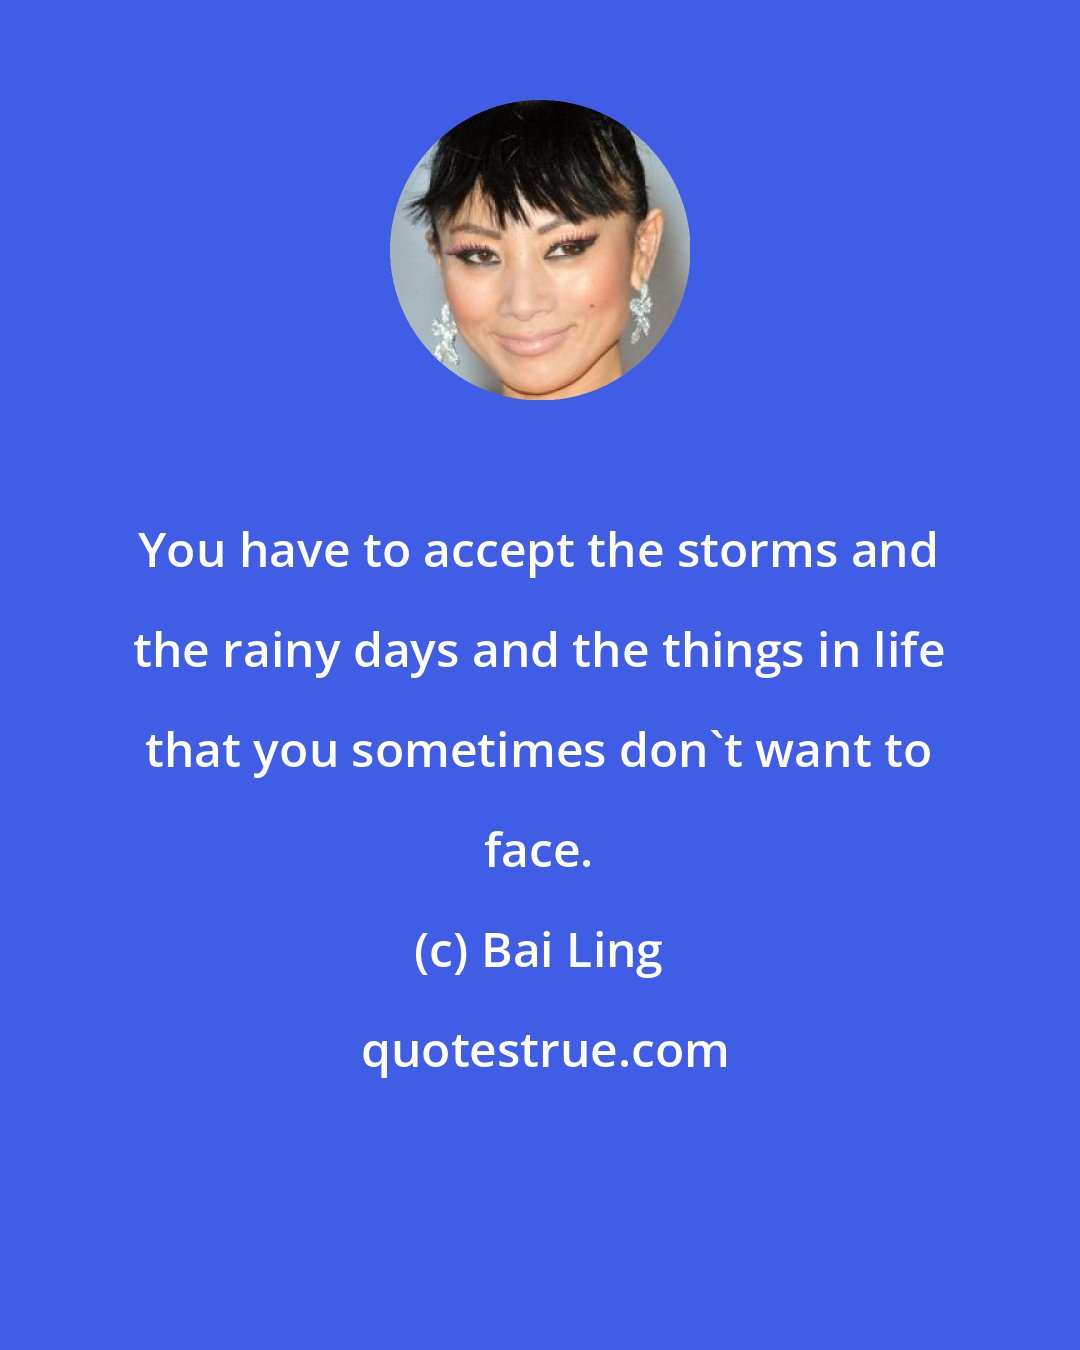 Bai Ling: You have to accept the storms and the rainy days and the things in life that you sometimes don't want to face.